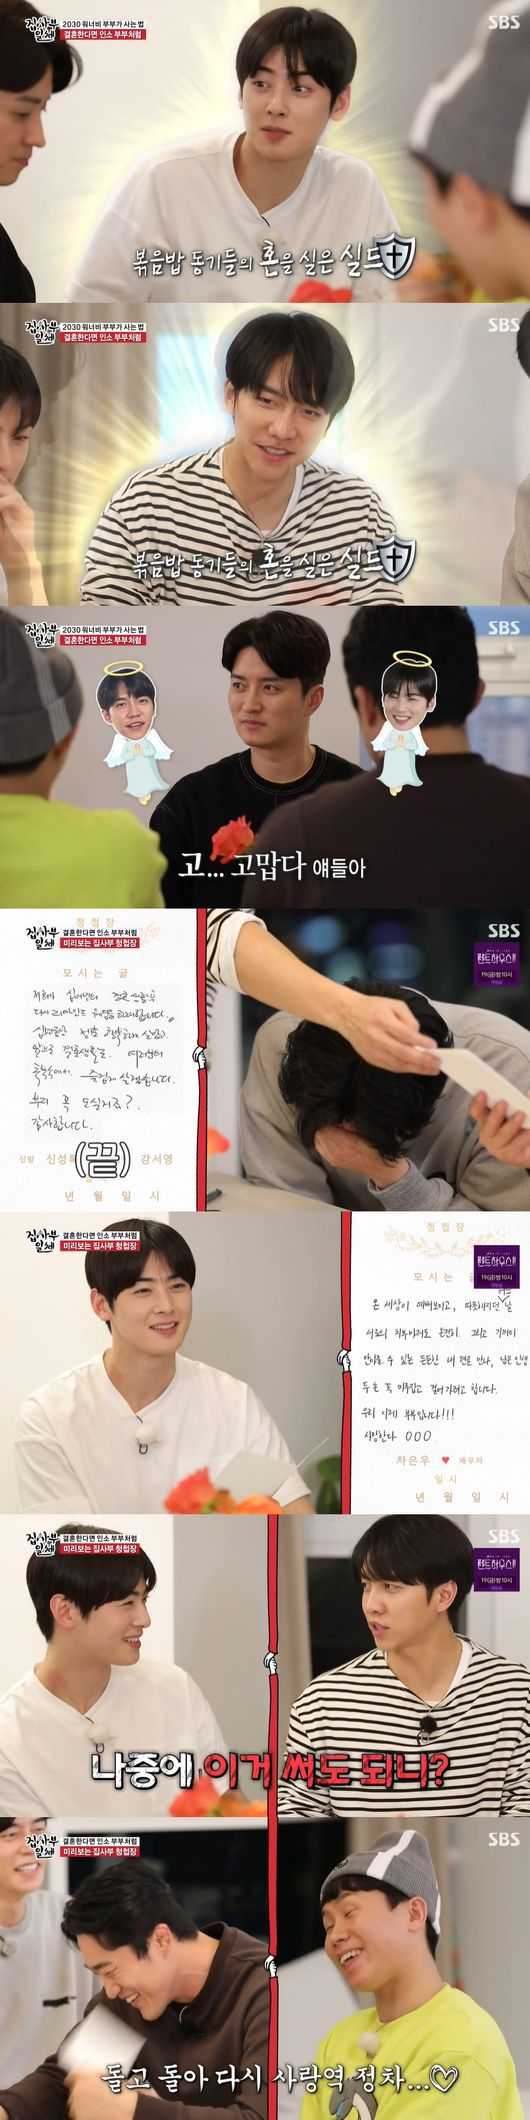 In All The Butlers, Cha Eun-woo was saddened by the fact that he poured out Tears among the Prayers about marriage.Above all, he showed his sincerity about marriage and attracted attention.Cha Eun-woo told the idea of ​​marriage in SBS entertainment All The Butlers broadcast on the 7th.On this day, the production crew asked the married Shin Sung-rok and Kim Dong-Hyun if they recommended marriage, and Shin Sung-rok said, It worked well after marriage.Kim Dong-Hyun also laughed at his wives, saying he recommended marriage.Lee Seung-gi, a single person, said, I thought it was vague someday, but now I am old enough to think seriously about marriage.Yang Se-hyeong said, I want to marriage unconditionally, but I do not want to do marriage like homework, and if there is someone to marriage, I want to marriage.Cha Eun-woo said, I want to marriage, he said. I think I would be lonely if I was 100 years old, I thought about my life partner, but I did not think deeply.At this time, In Gyo-jin and So Yi-hyun appeared and had the question time of the unmarried.Yang Se-hyeong wondered if anyone who would marriage would feel fate as soon as he saw it, and when asked if he was sure, In Gyo-jin said, I do not think it was my first marriage opponent, and when I first met, Lee Hyun was a high school student.In Gyo-jin was ashamed, saying, Lets marriage the day Lee Hyun dates. So Yi-hyun said, Do you want to marriage me with a meat in shochu?I asked him to say, In Gyo-jin said, What do you have to do with us? If you are going to go out, I asked him to marriage, and he immediately called my parents.Yang Se-hyeong, who listened to this, said, I think I know, its so funny. So Yi-hyun said, Who is it?When the members teased, Yang Se-hyeong was embarrassed, saying, I also had thirty-seven, many experiences.Cha Eun-woo asked what kind of attitude the 20s should have about marriage, and the two people advised, Do not have a lot of friends, but meet a lot of friends and experience it. Then, The conversation is very good, it is not constant, I did not have two minutes.We should share our hobbies unconditionally, he said.Cha Eun-woo also envied, I do not believe in the word natural love, but I think they are natural love.Cha Eun-woo said, I want to marriage too. He said, Who can open up my shame?I felt that it was possible when I became a couple, she said.All of them noticed Cha Eun-woo as he blushed, and Cha Eun-woo suddenly shed tears on the emotions that he could not say.The members joked to release the feeling, saying, Have you been having a hard time or divorced once? He also advised, You have to tell someone, you should not build up.Cha Eun-woo said, It is not easy to say that the whole inner side is not easy, so it gave a big echo. It seems that it is not easy to tell everyone about everything as well as my teeth.All of them said, We are on your side.I drove the atmosphere, everyone said, Lets write down the wedding invitation letter thinking about my side.Cha Eun-woo said, One day when the whole world looked pretty and warm, I met my strong side, who was willing to hold each others teeth, and I am going to walk out with my hands in the rest of my life, we are now a couple.All The Butlers broadcast screen capture